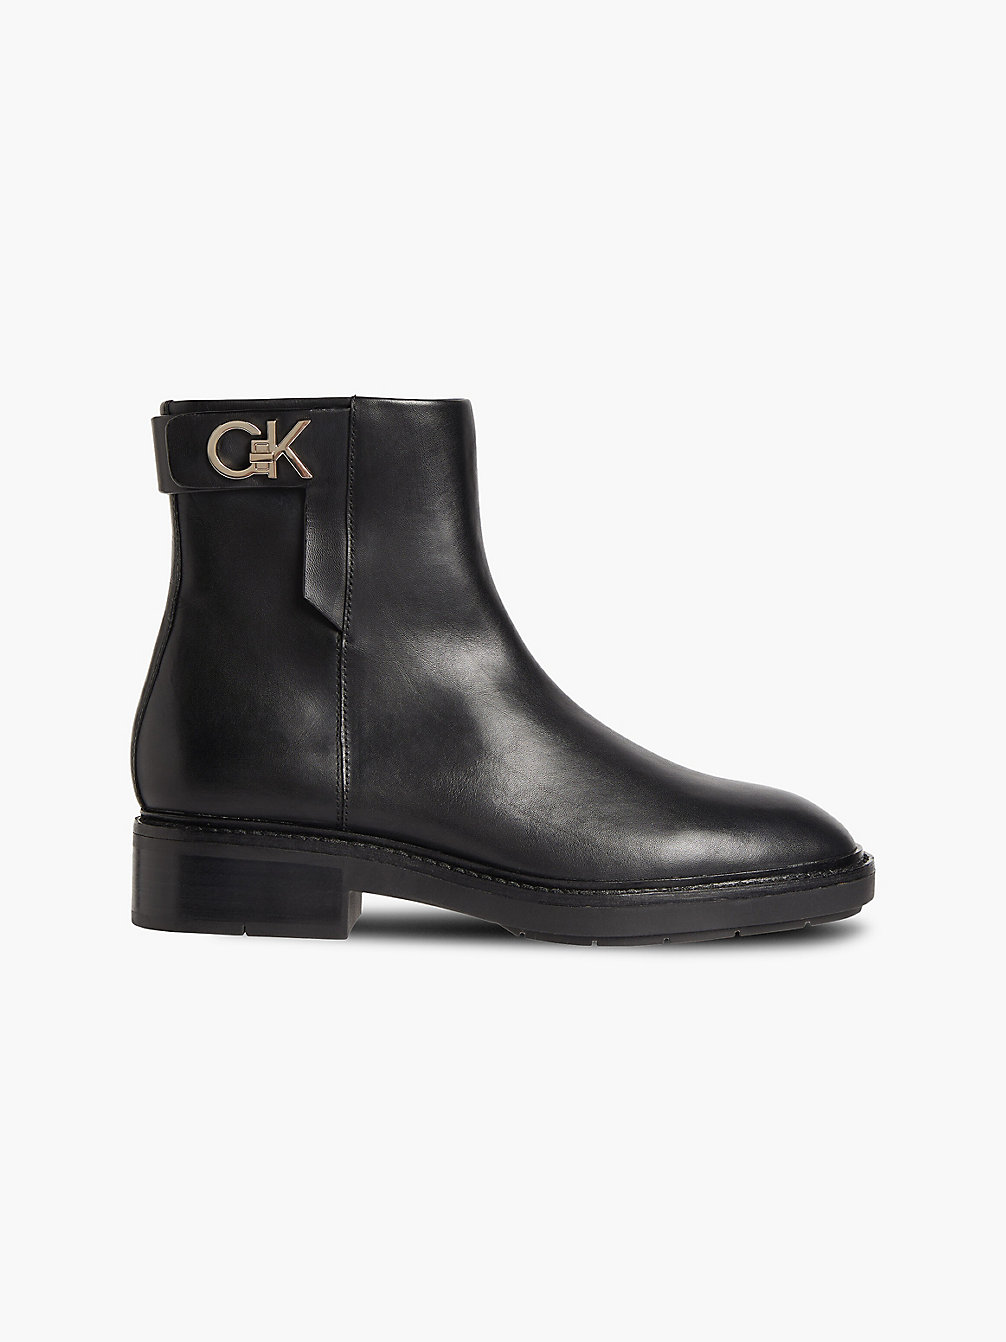 CK BLACK Leather Ankle Boots undefined women Calvin Klein